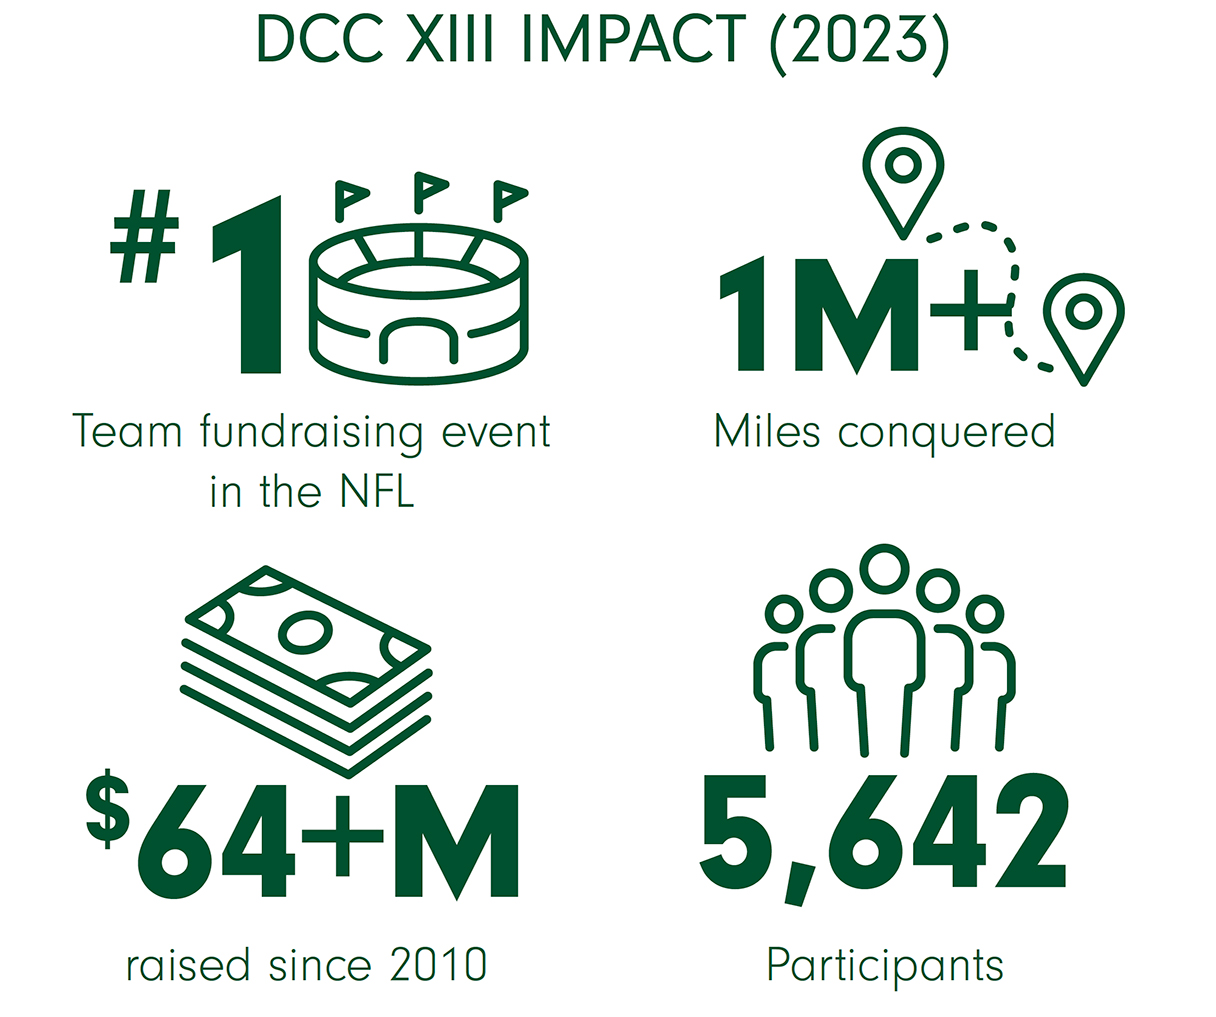 DCC Impact - #1 team funding event in the NFL, 1 Million Miles conquered, 64+ Million raised since 2010, 5,642 participants